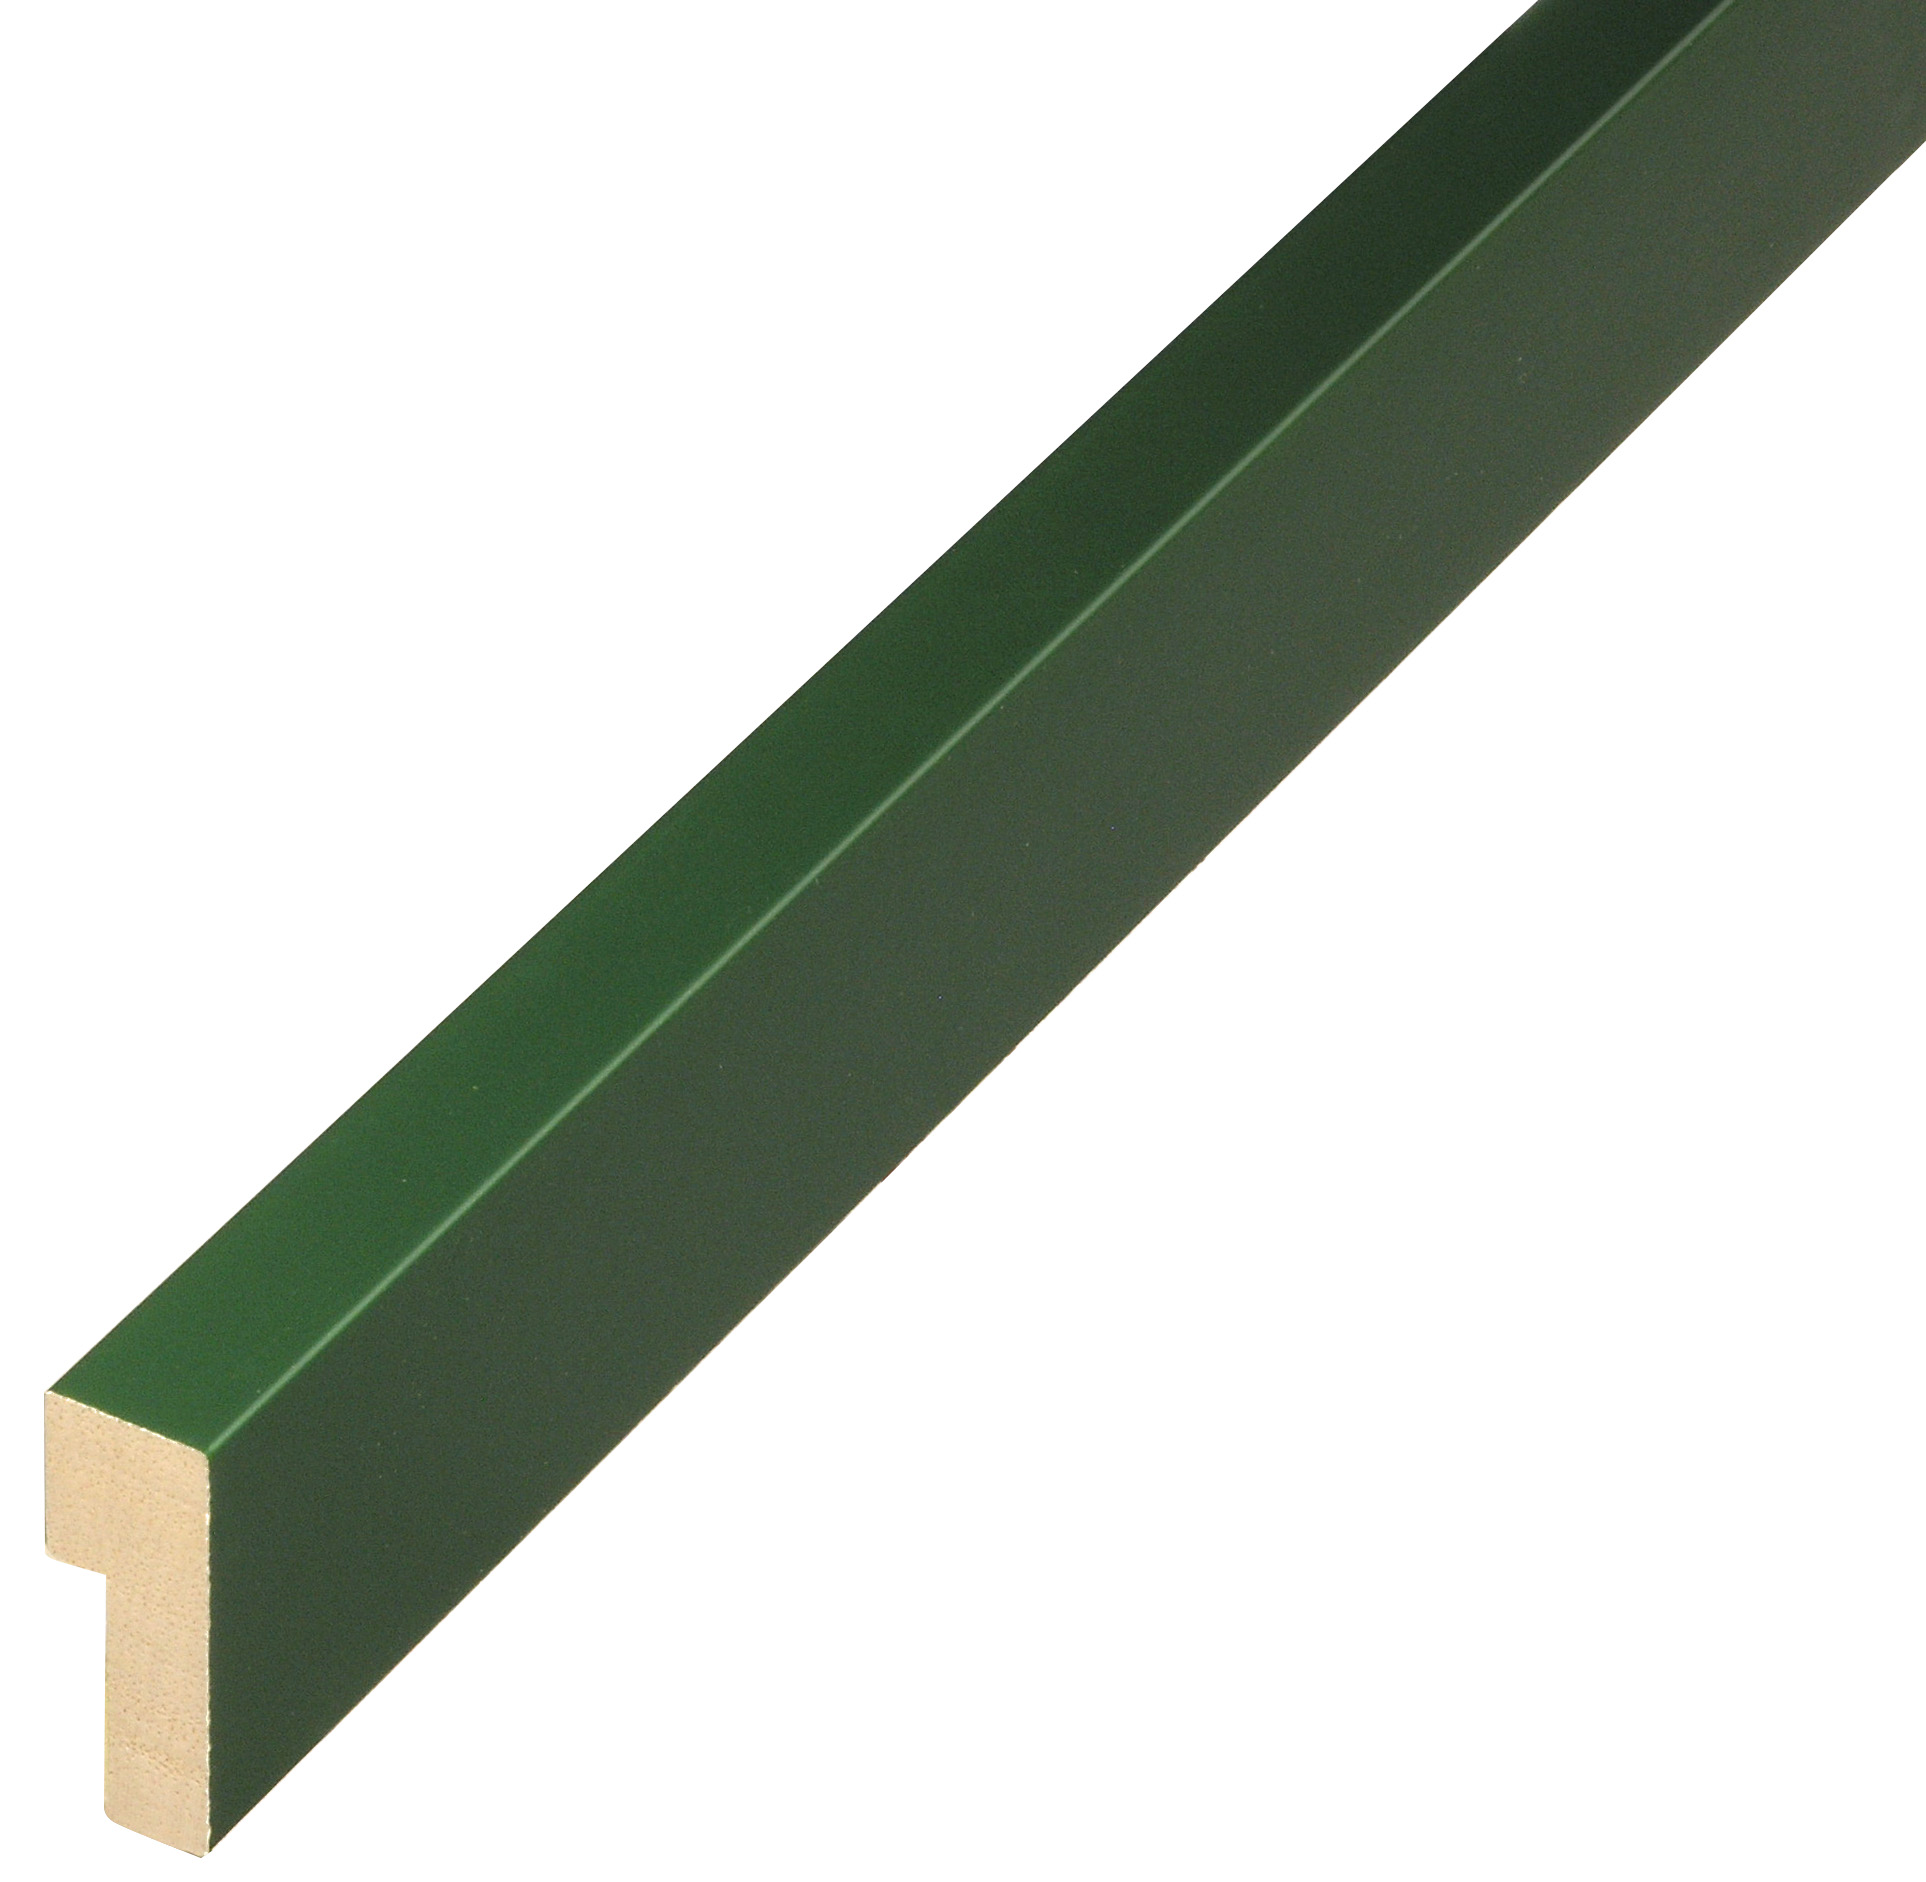 Moulding ayous - Widht 15 mm - Height 40 mm - Green - 726VERDE